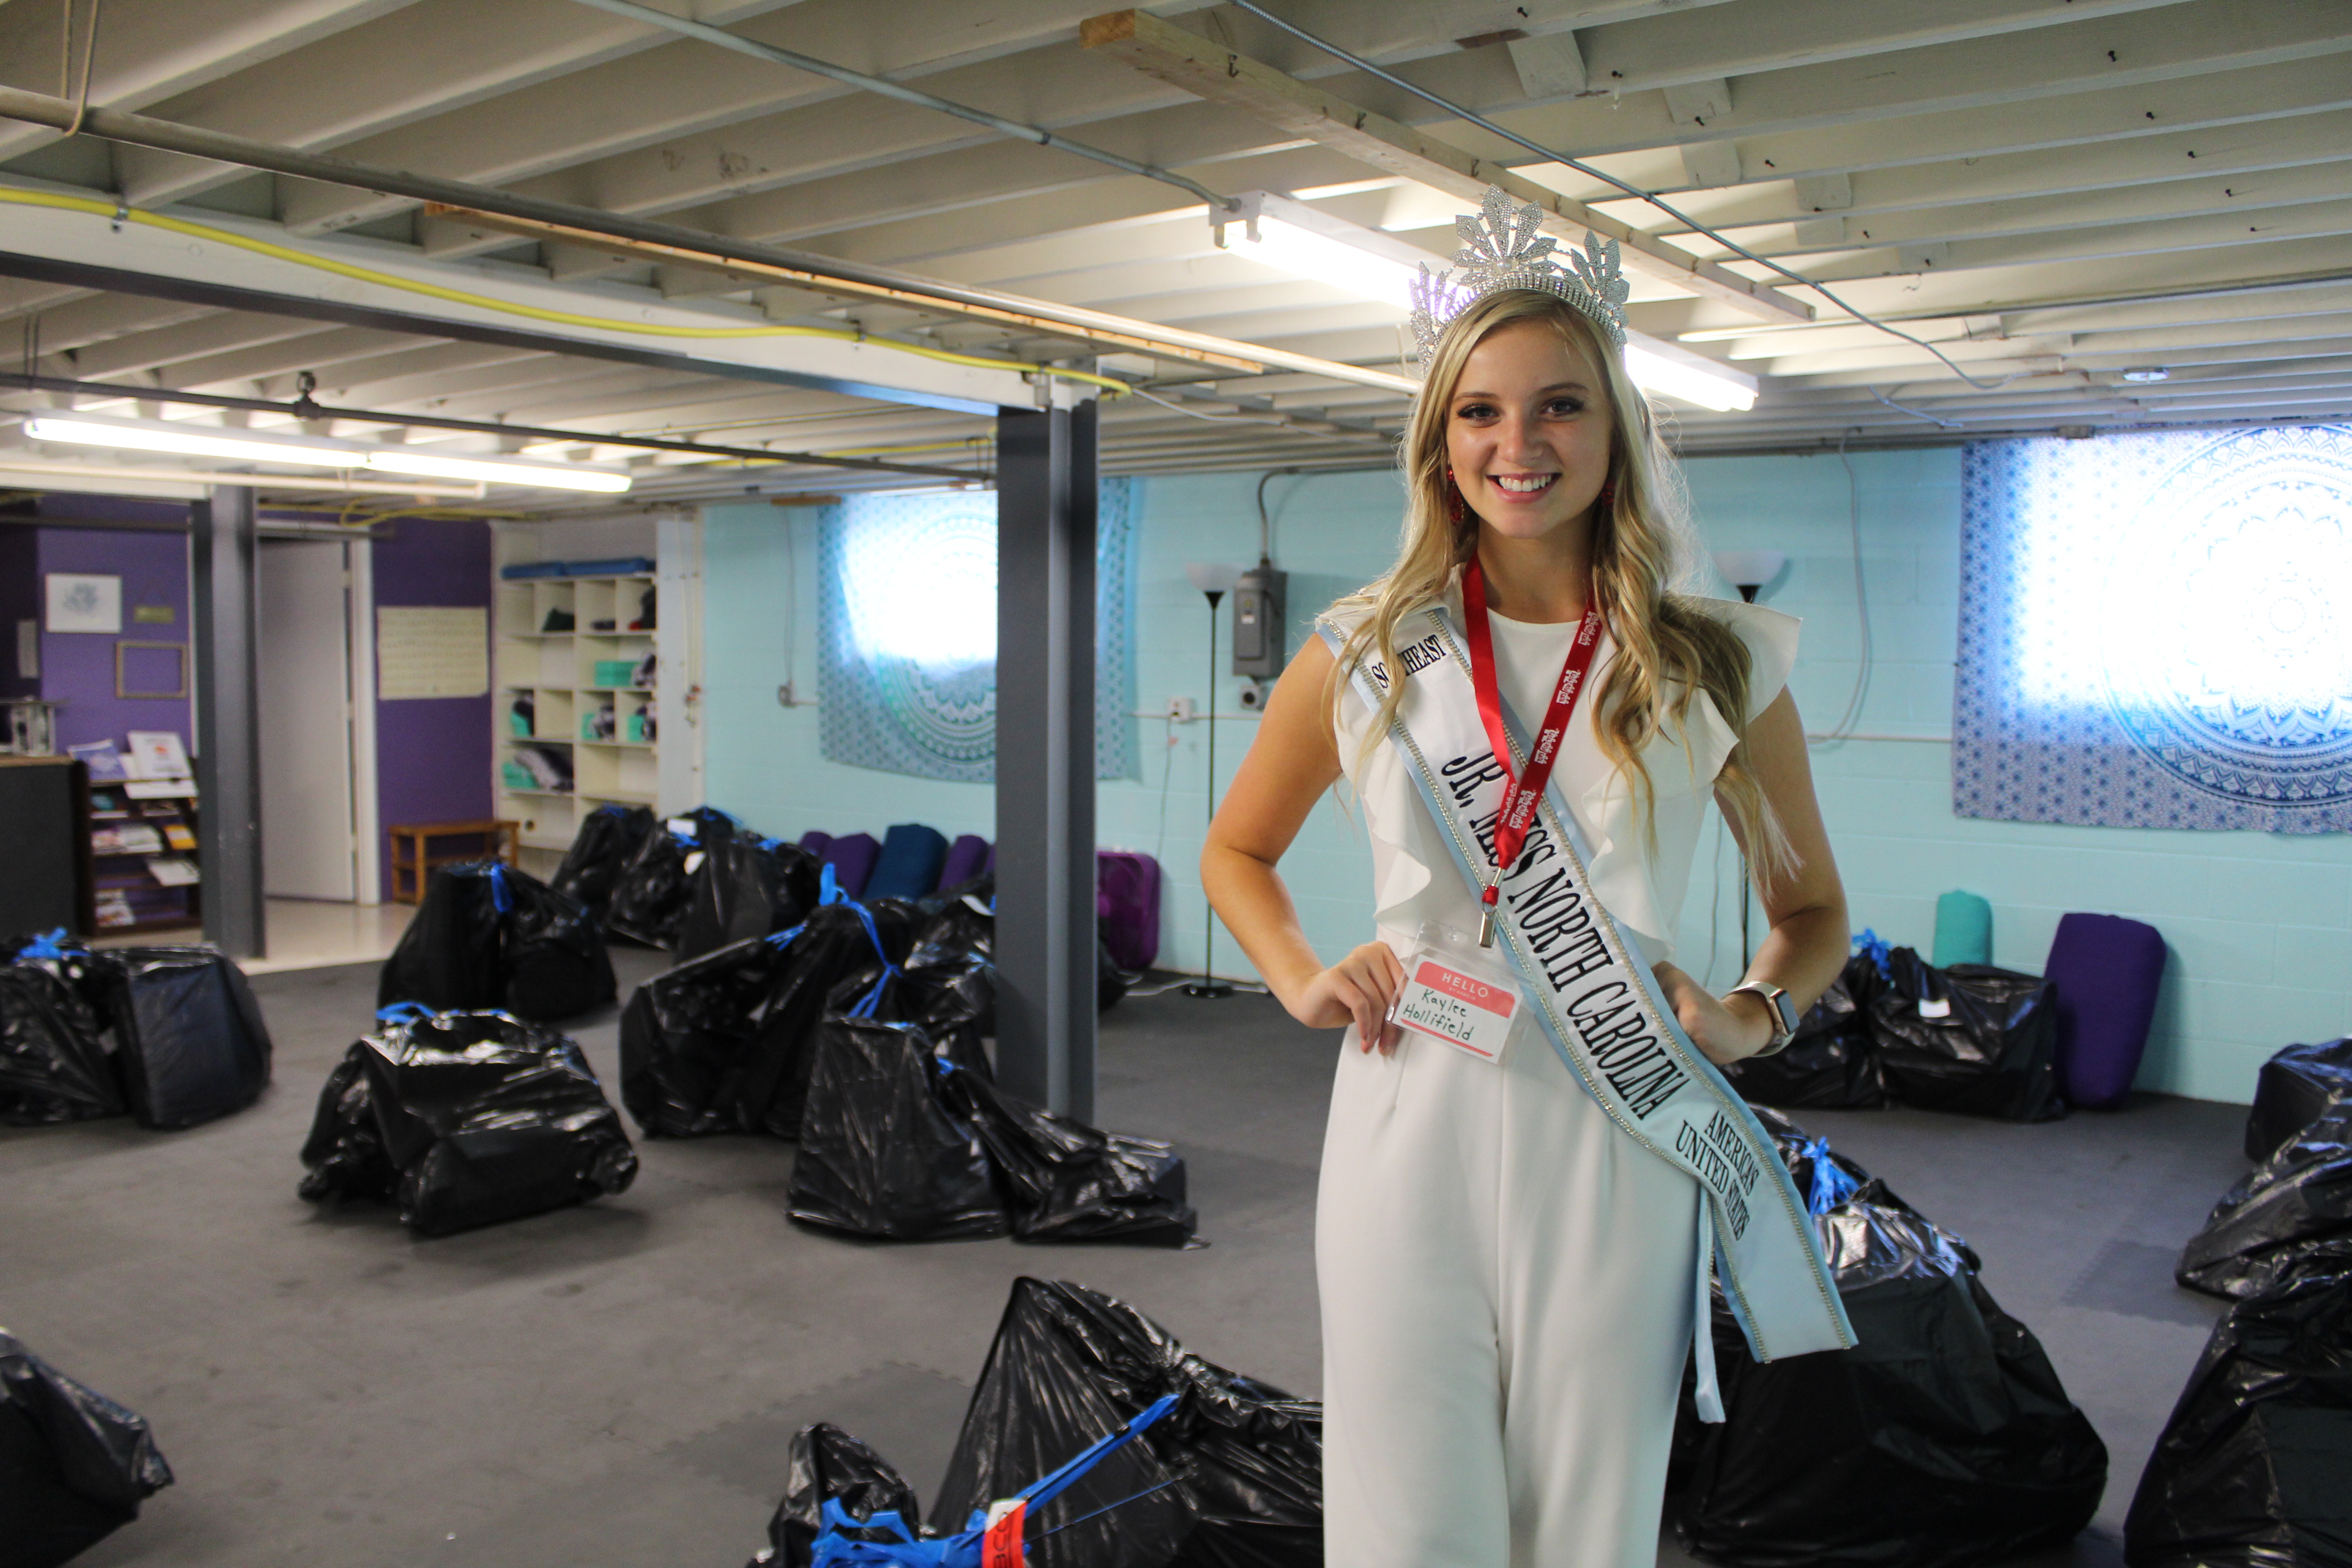 Kaylee Hollifield, Junior Miss NC Southeast America 2020, helped out with Toys for Tots distribution on Saturday, Dec. 12. Hollifield said helping out Toys for Tots was a privilege and she was happy to do it as part of her volunteering duties. (MNJ photo/Juliana Walker)